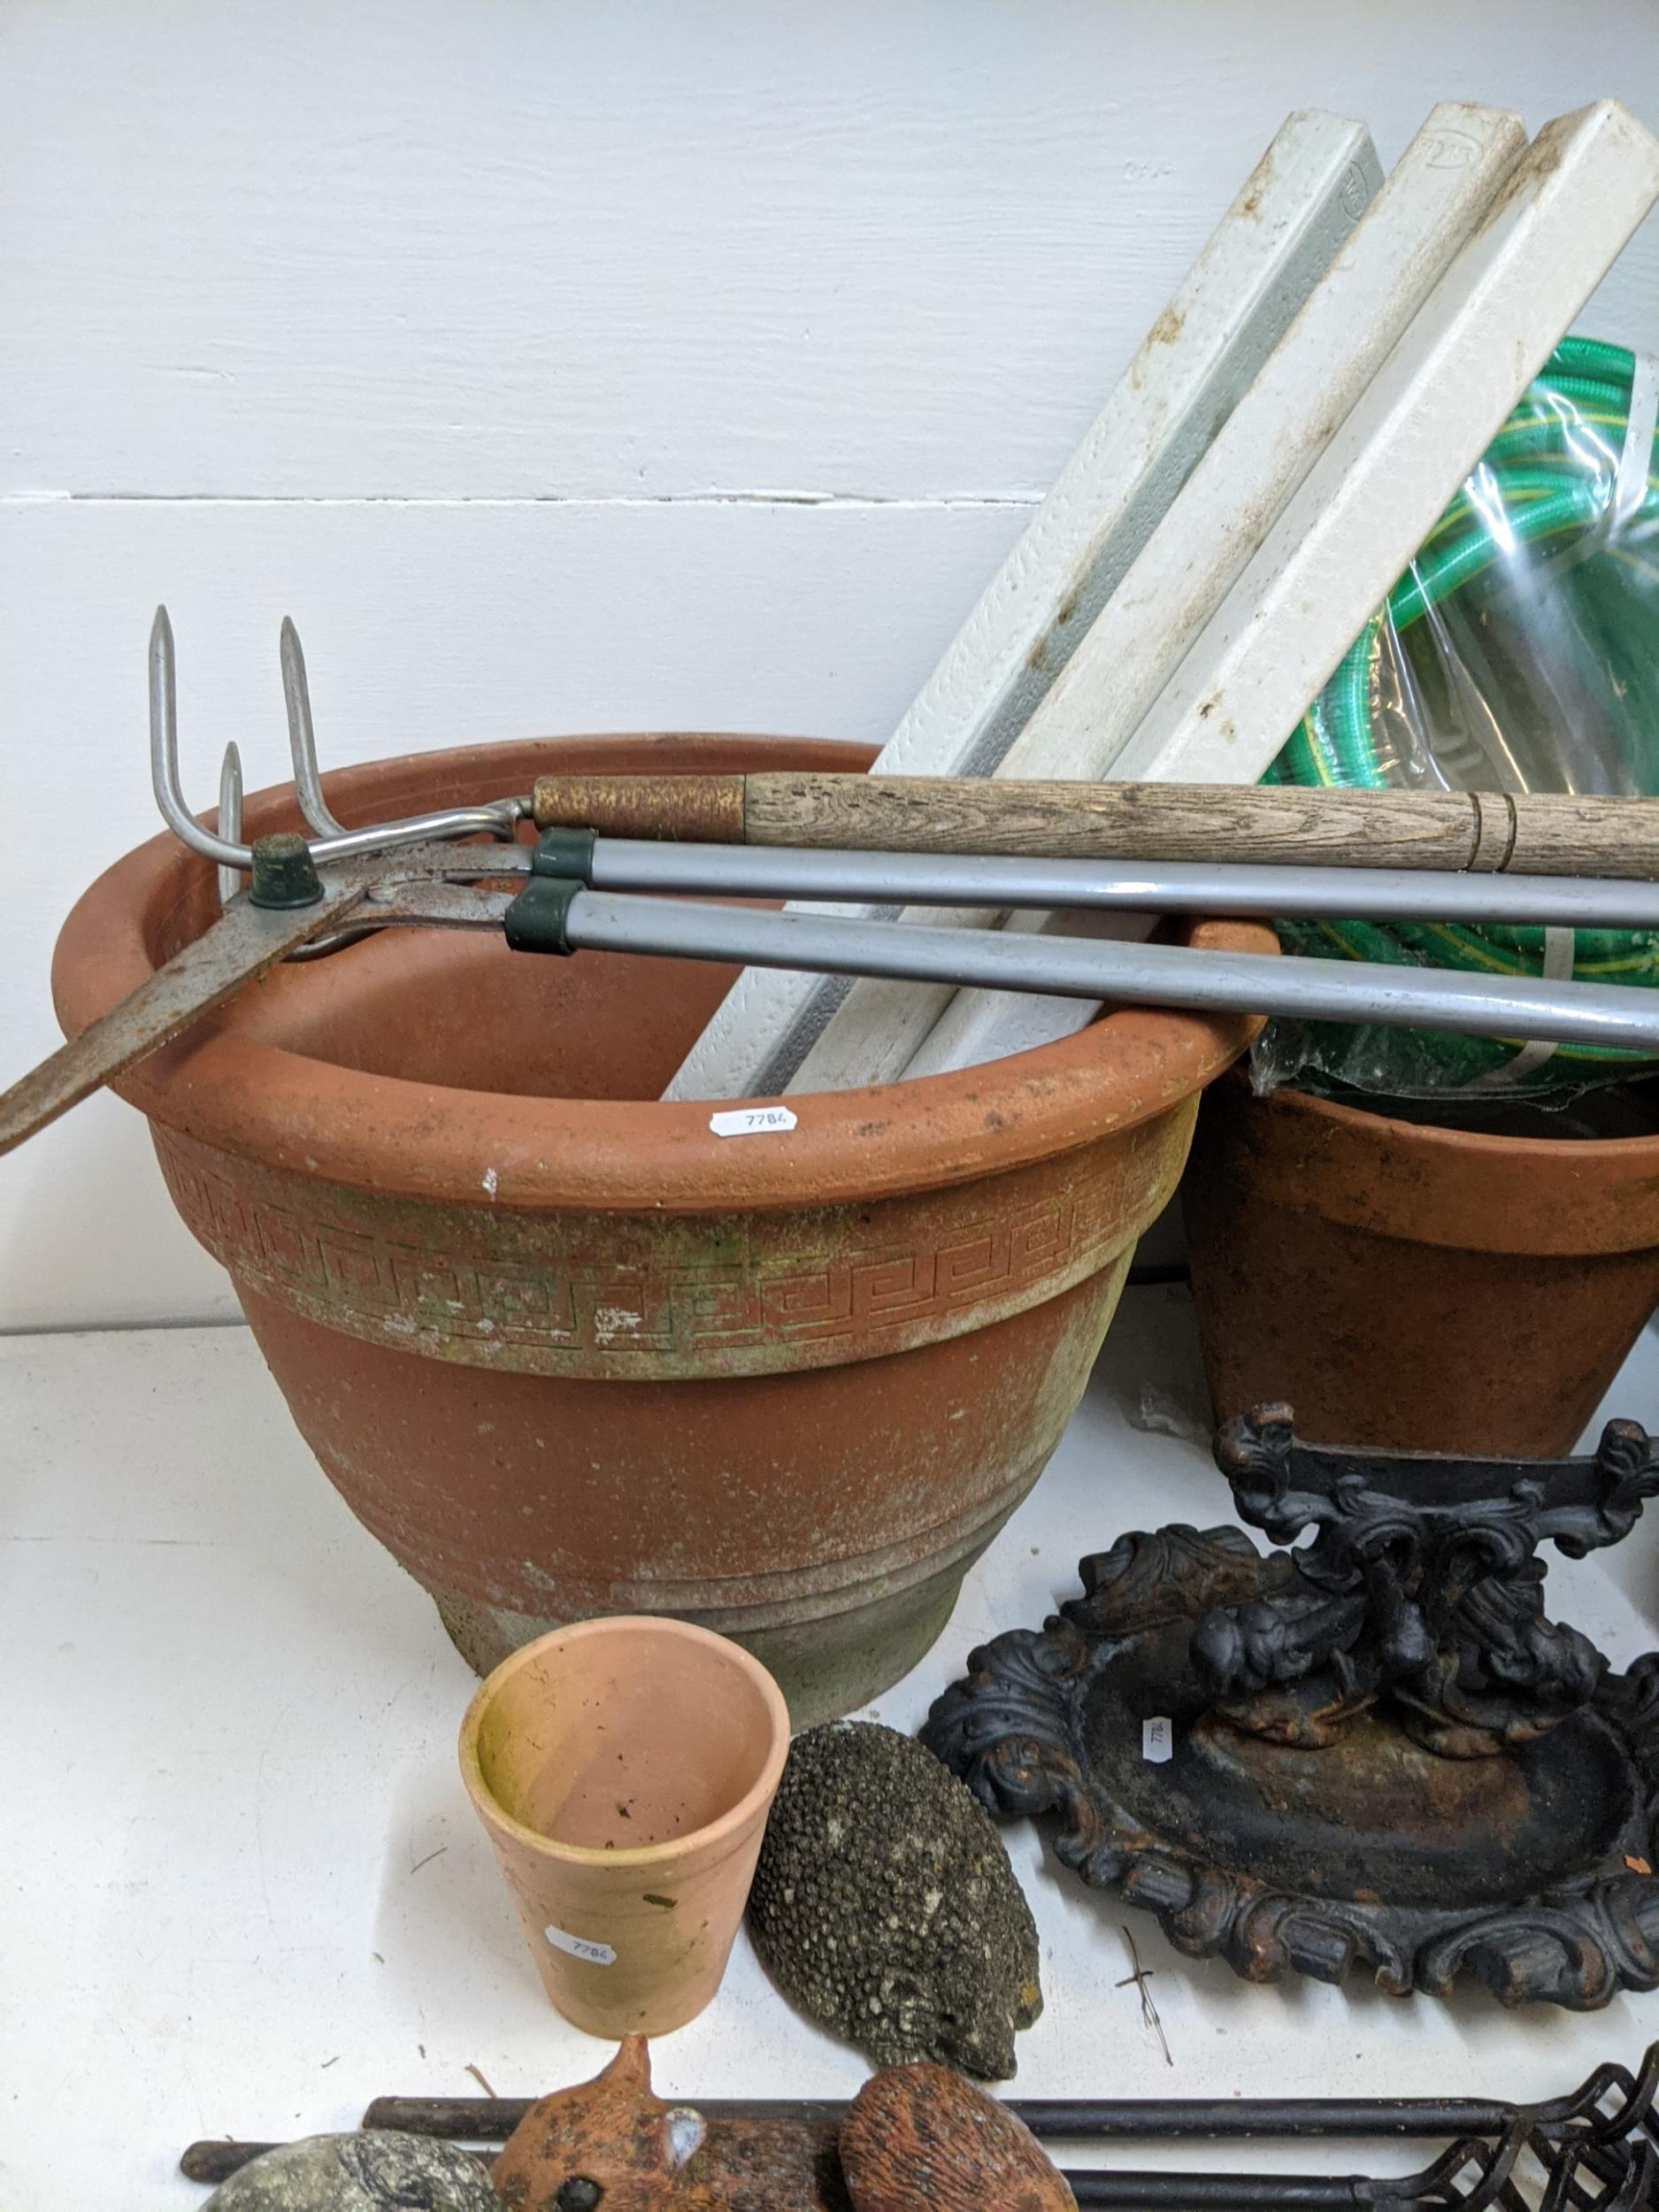 Garden related items to include pots, garden ornaments, a boot scraper, an unused hose, wooden - Image 2 of 9